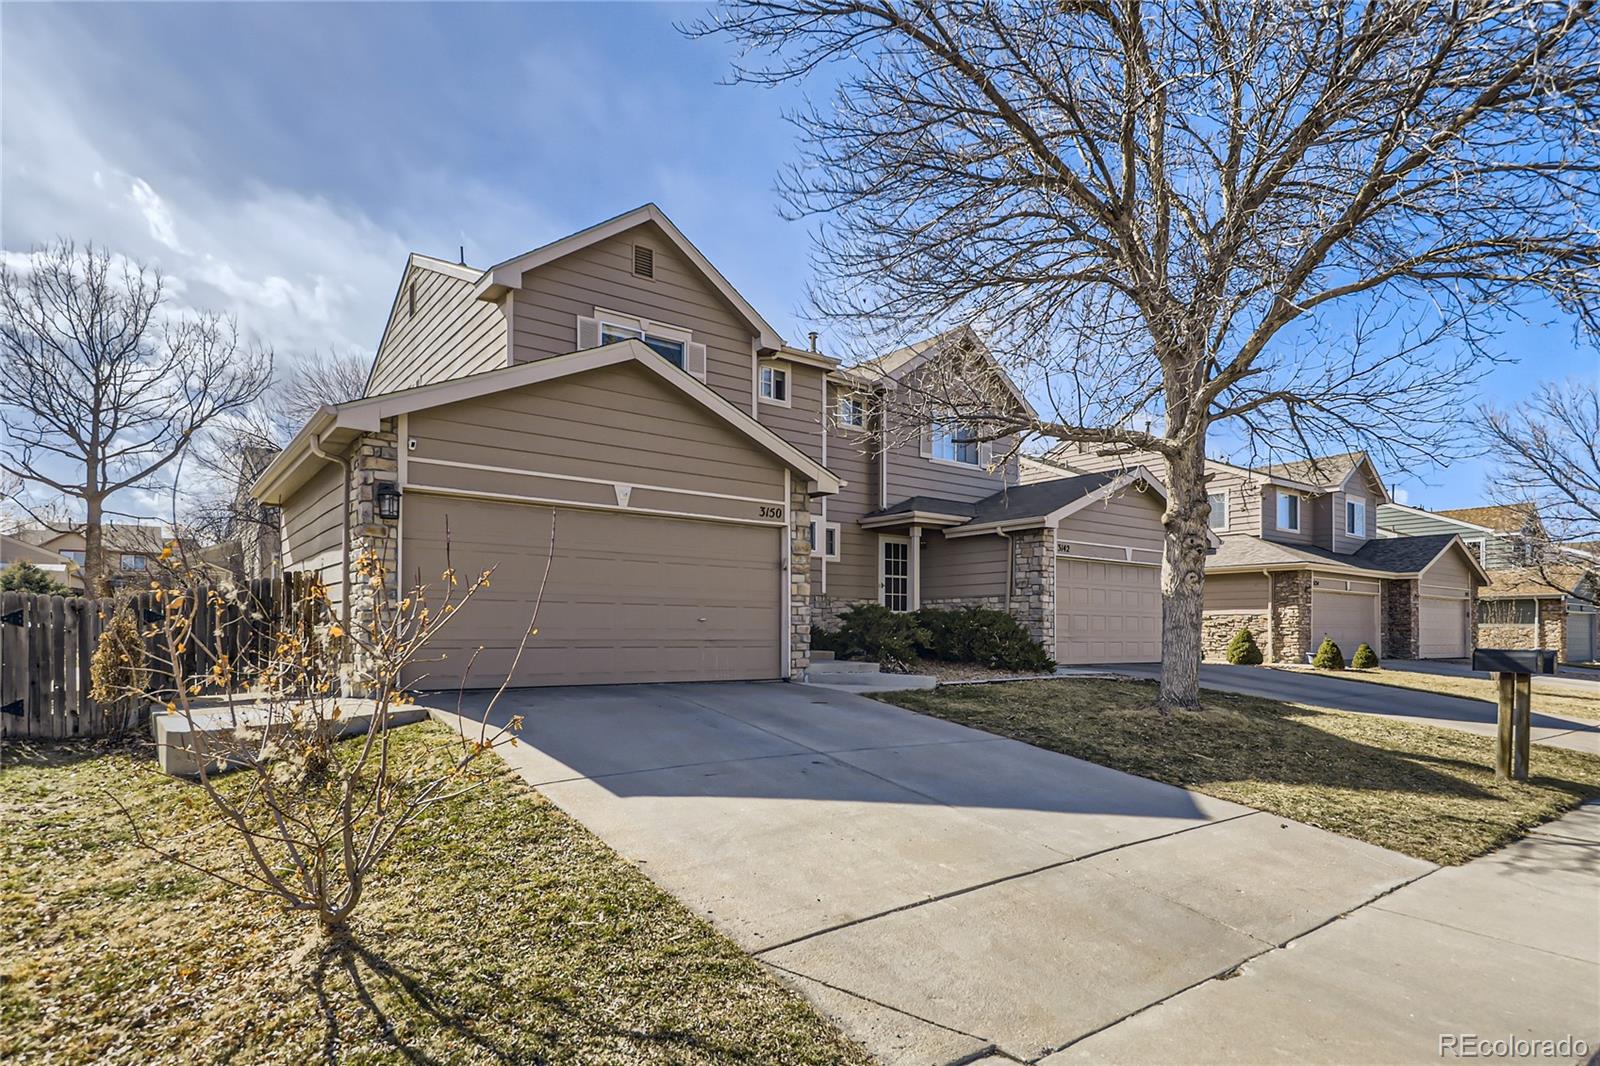 3150 e 106th place, Northglenn sold home. Closed on 2024-04-02 for $461,000.